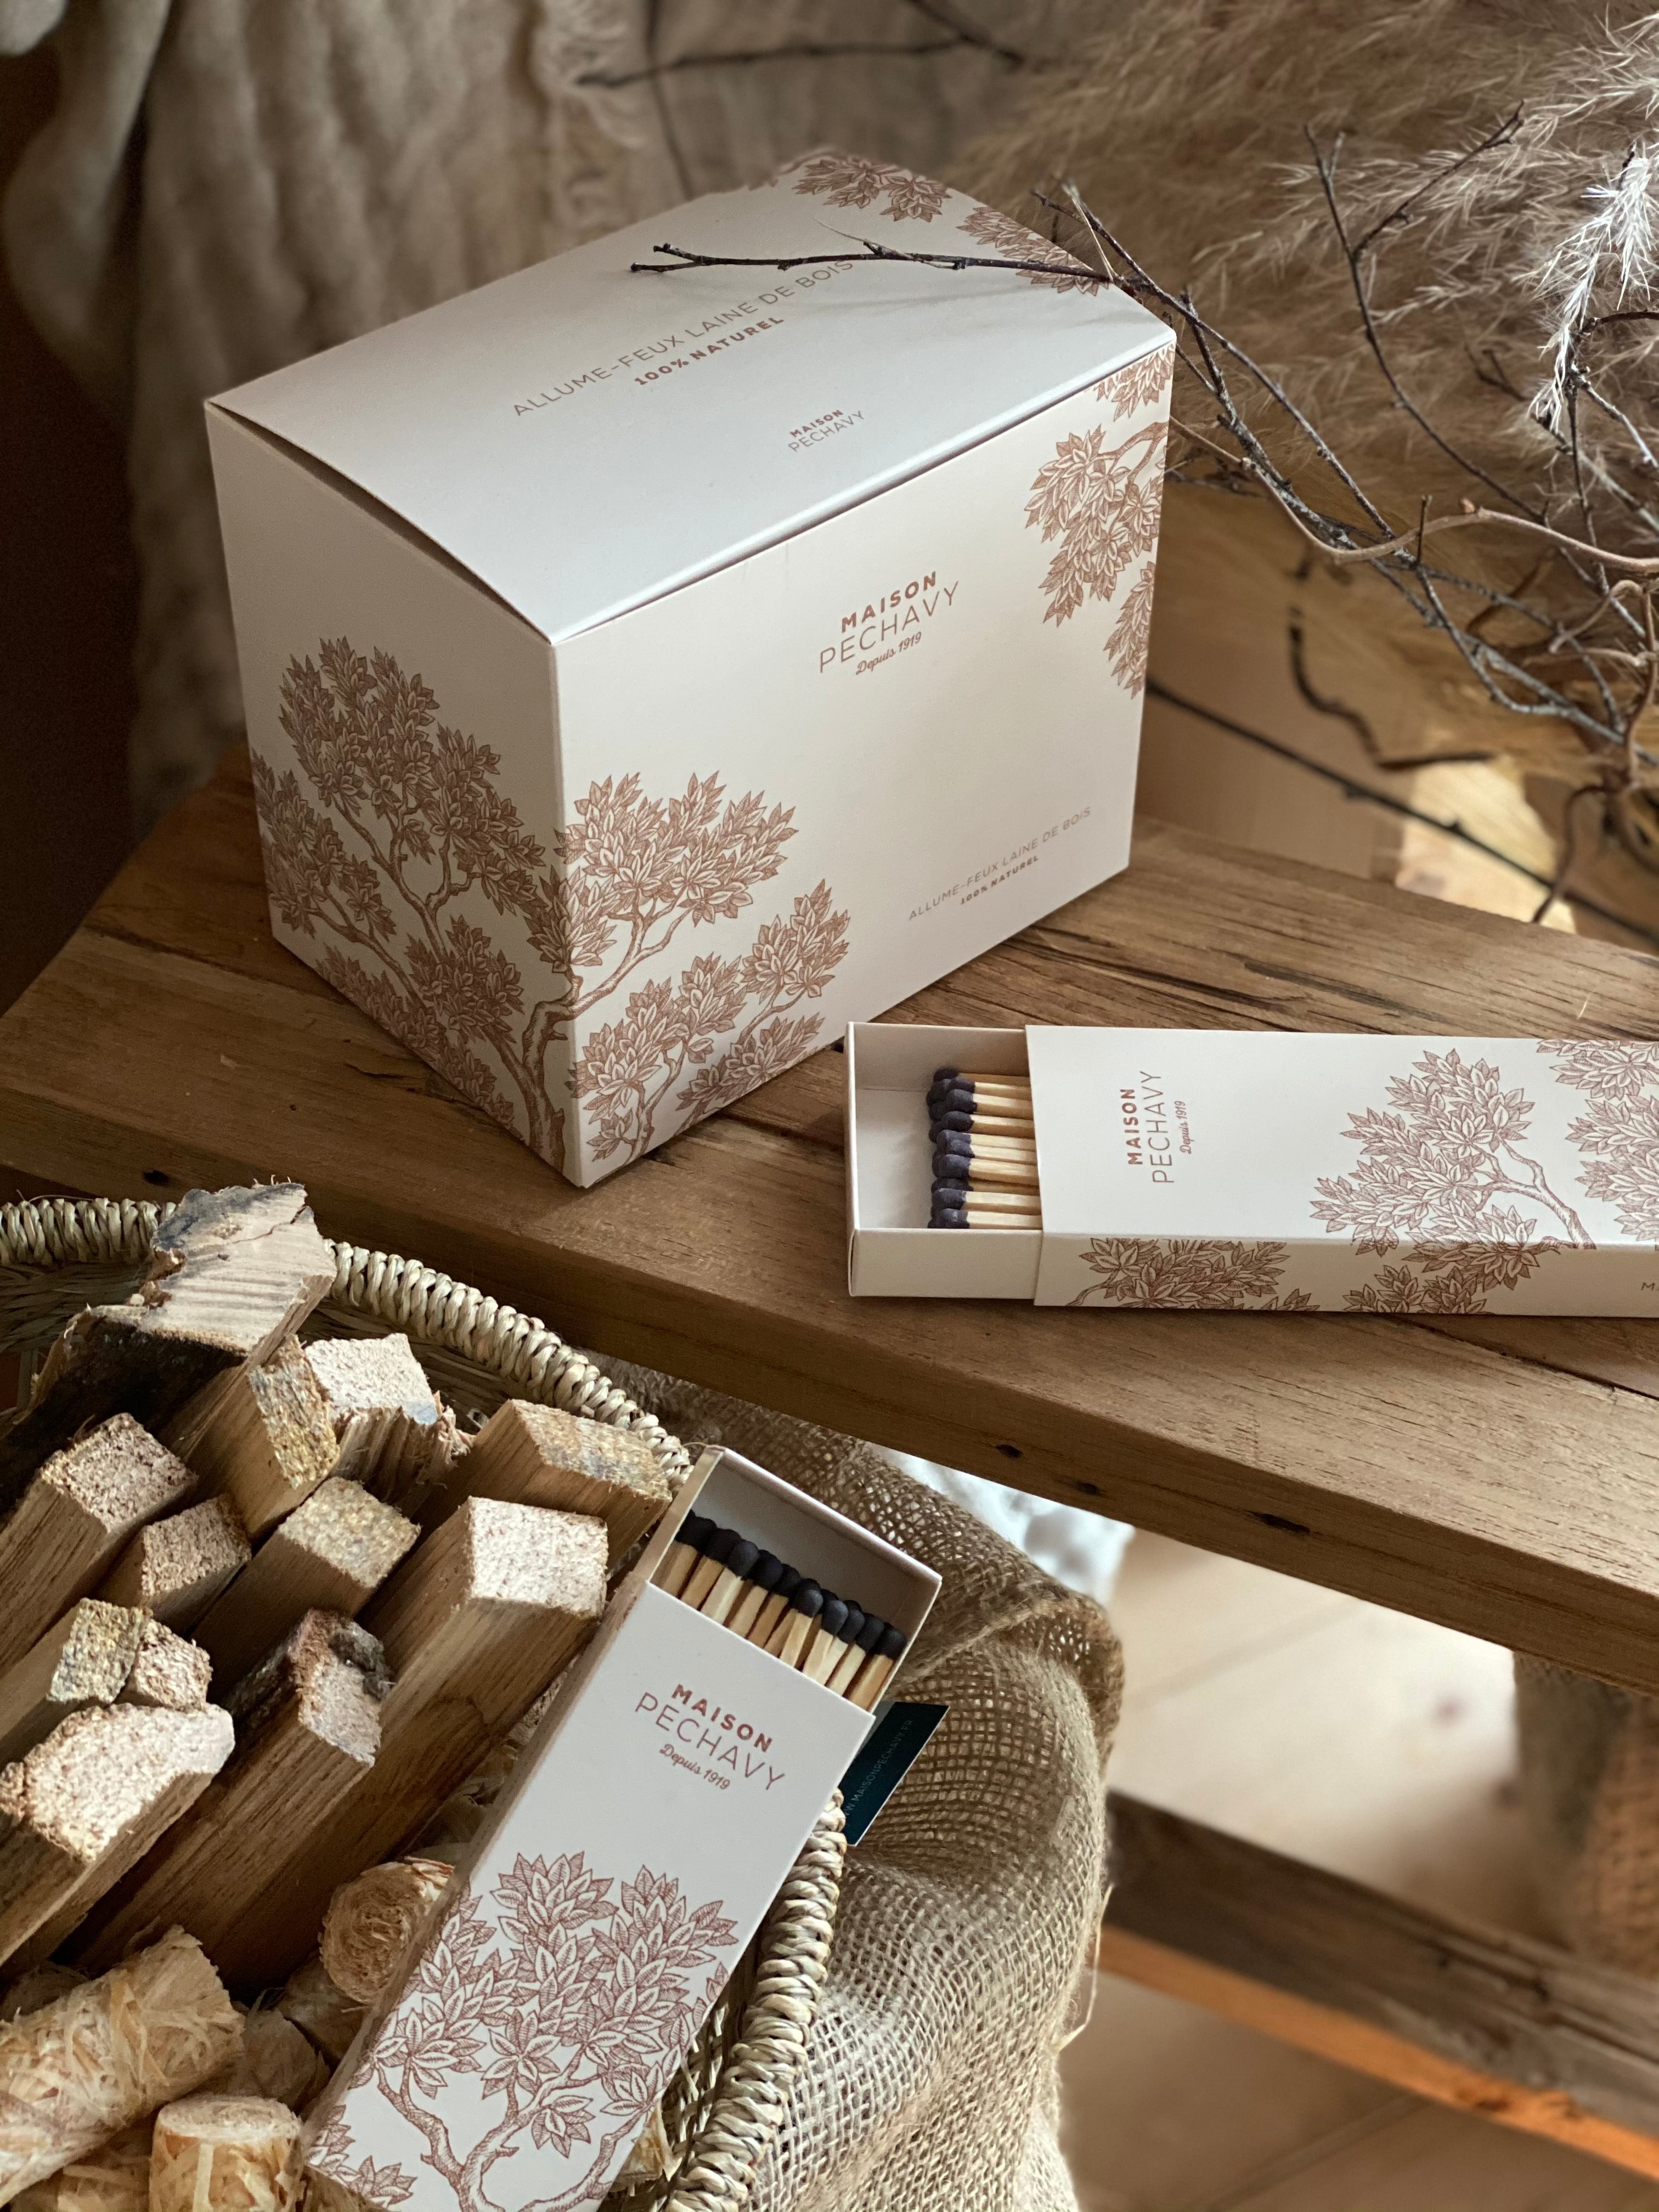 Maison Pechavy Firelighters & Matches Set (Nude) Maison Pechavy Brand_Maison Pechavy Gift Sets Home_Candles & Accessories Home_For The Fire Maison Pechavy Matches New Arrivals NUDEBoxes3IMG_4231